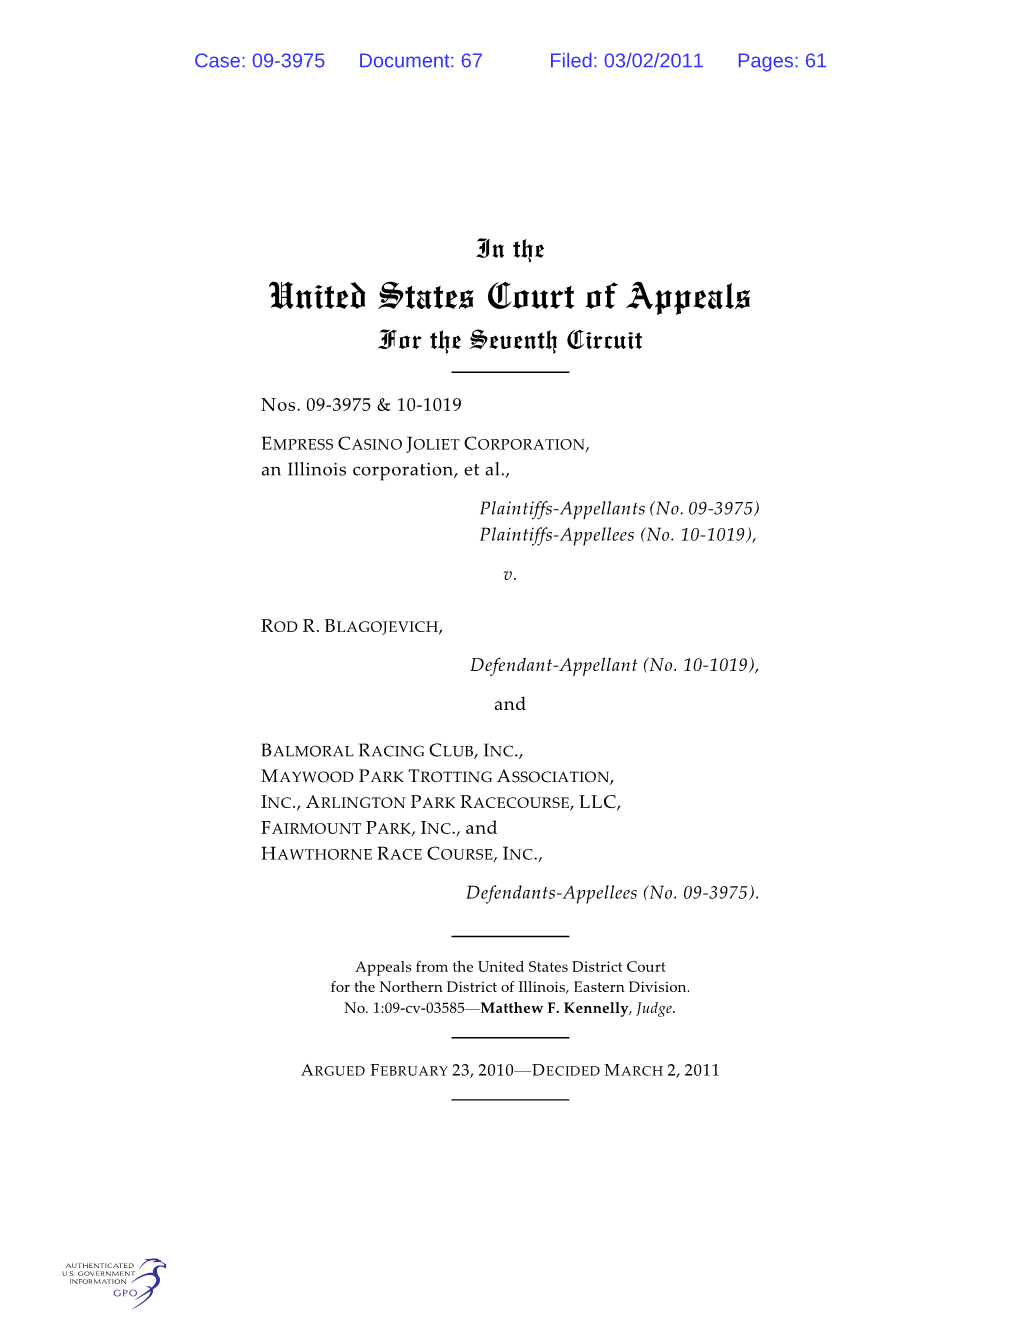 United States Court of Appeals for the Seventh Circuit